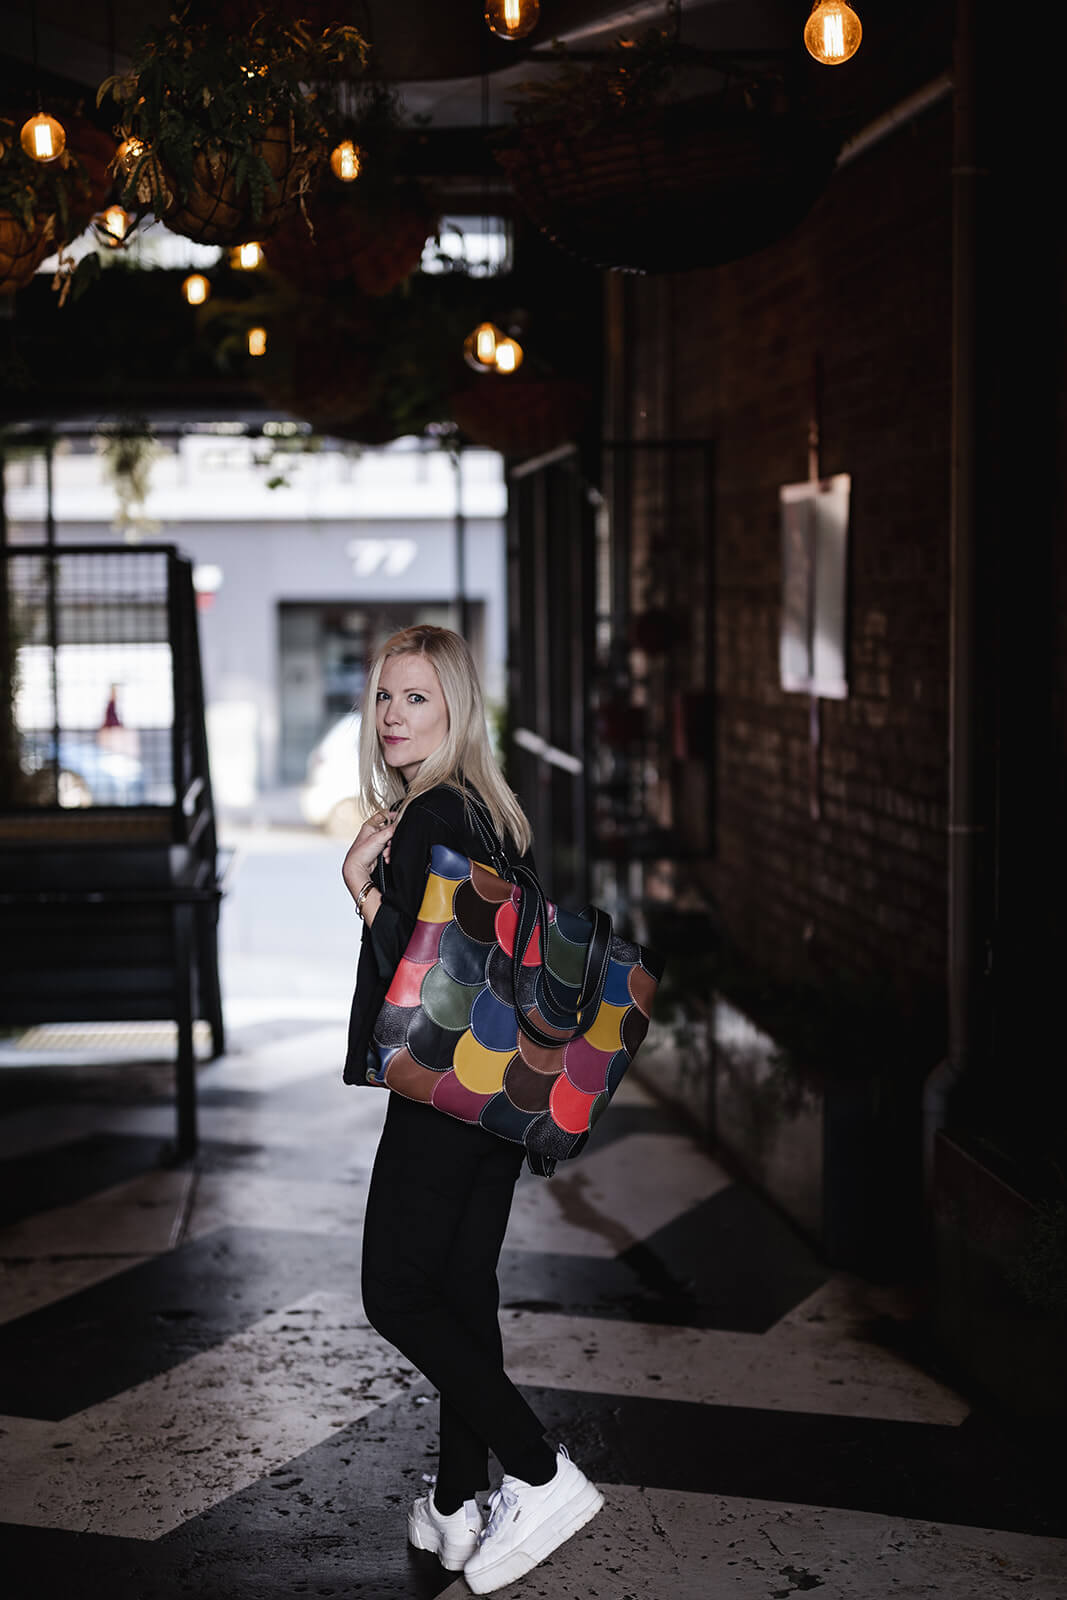 Woman standing in an alley. She has straight blonde hair and is wearing black top and pants, white shoes and a multicoloured backpack. She is facing away but turning her head over her shoulder that the backpack is on. The backpack is made of colourful rounds of leather in lots colours all stitched together. It is The Circle Bag in Multicolour by Ella Jackson